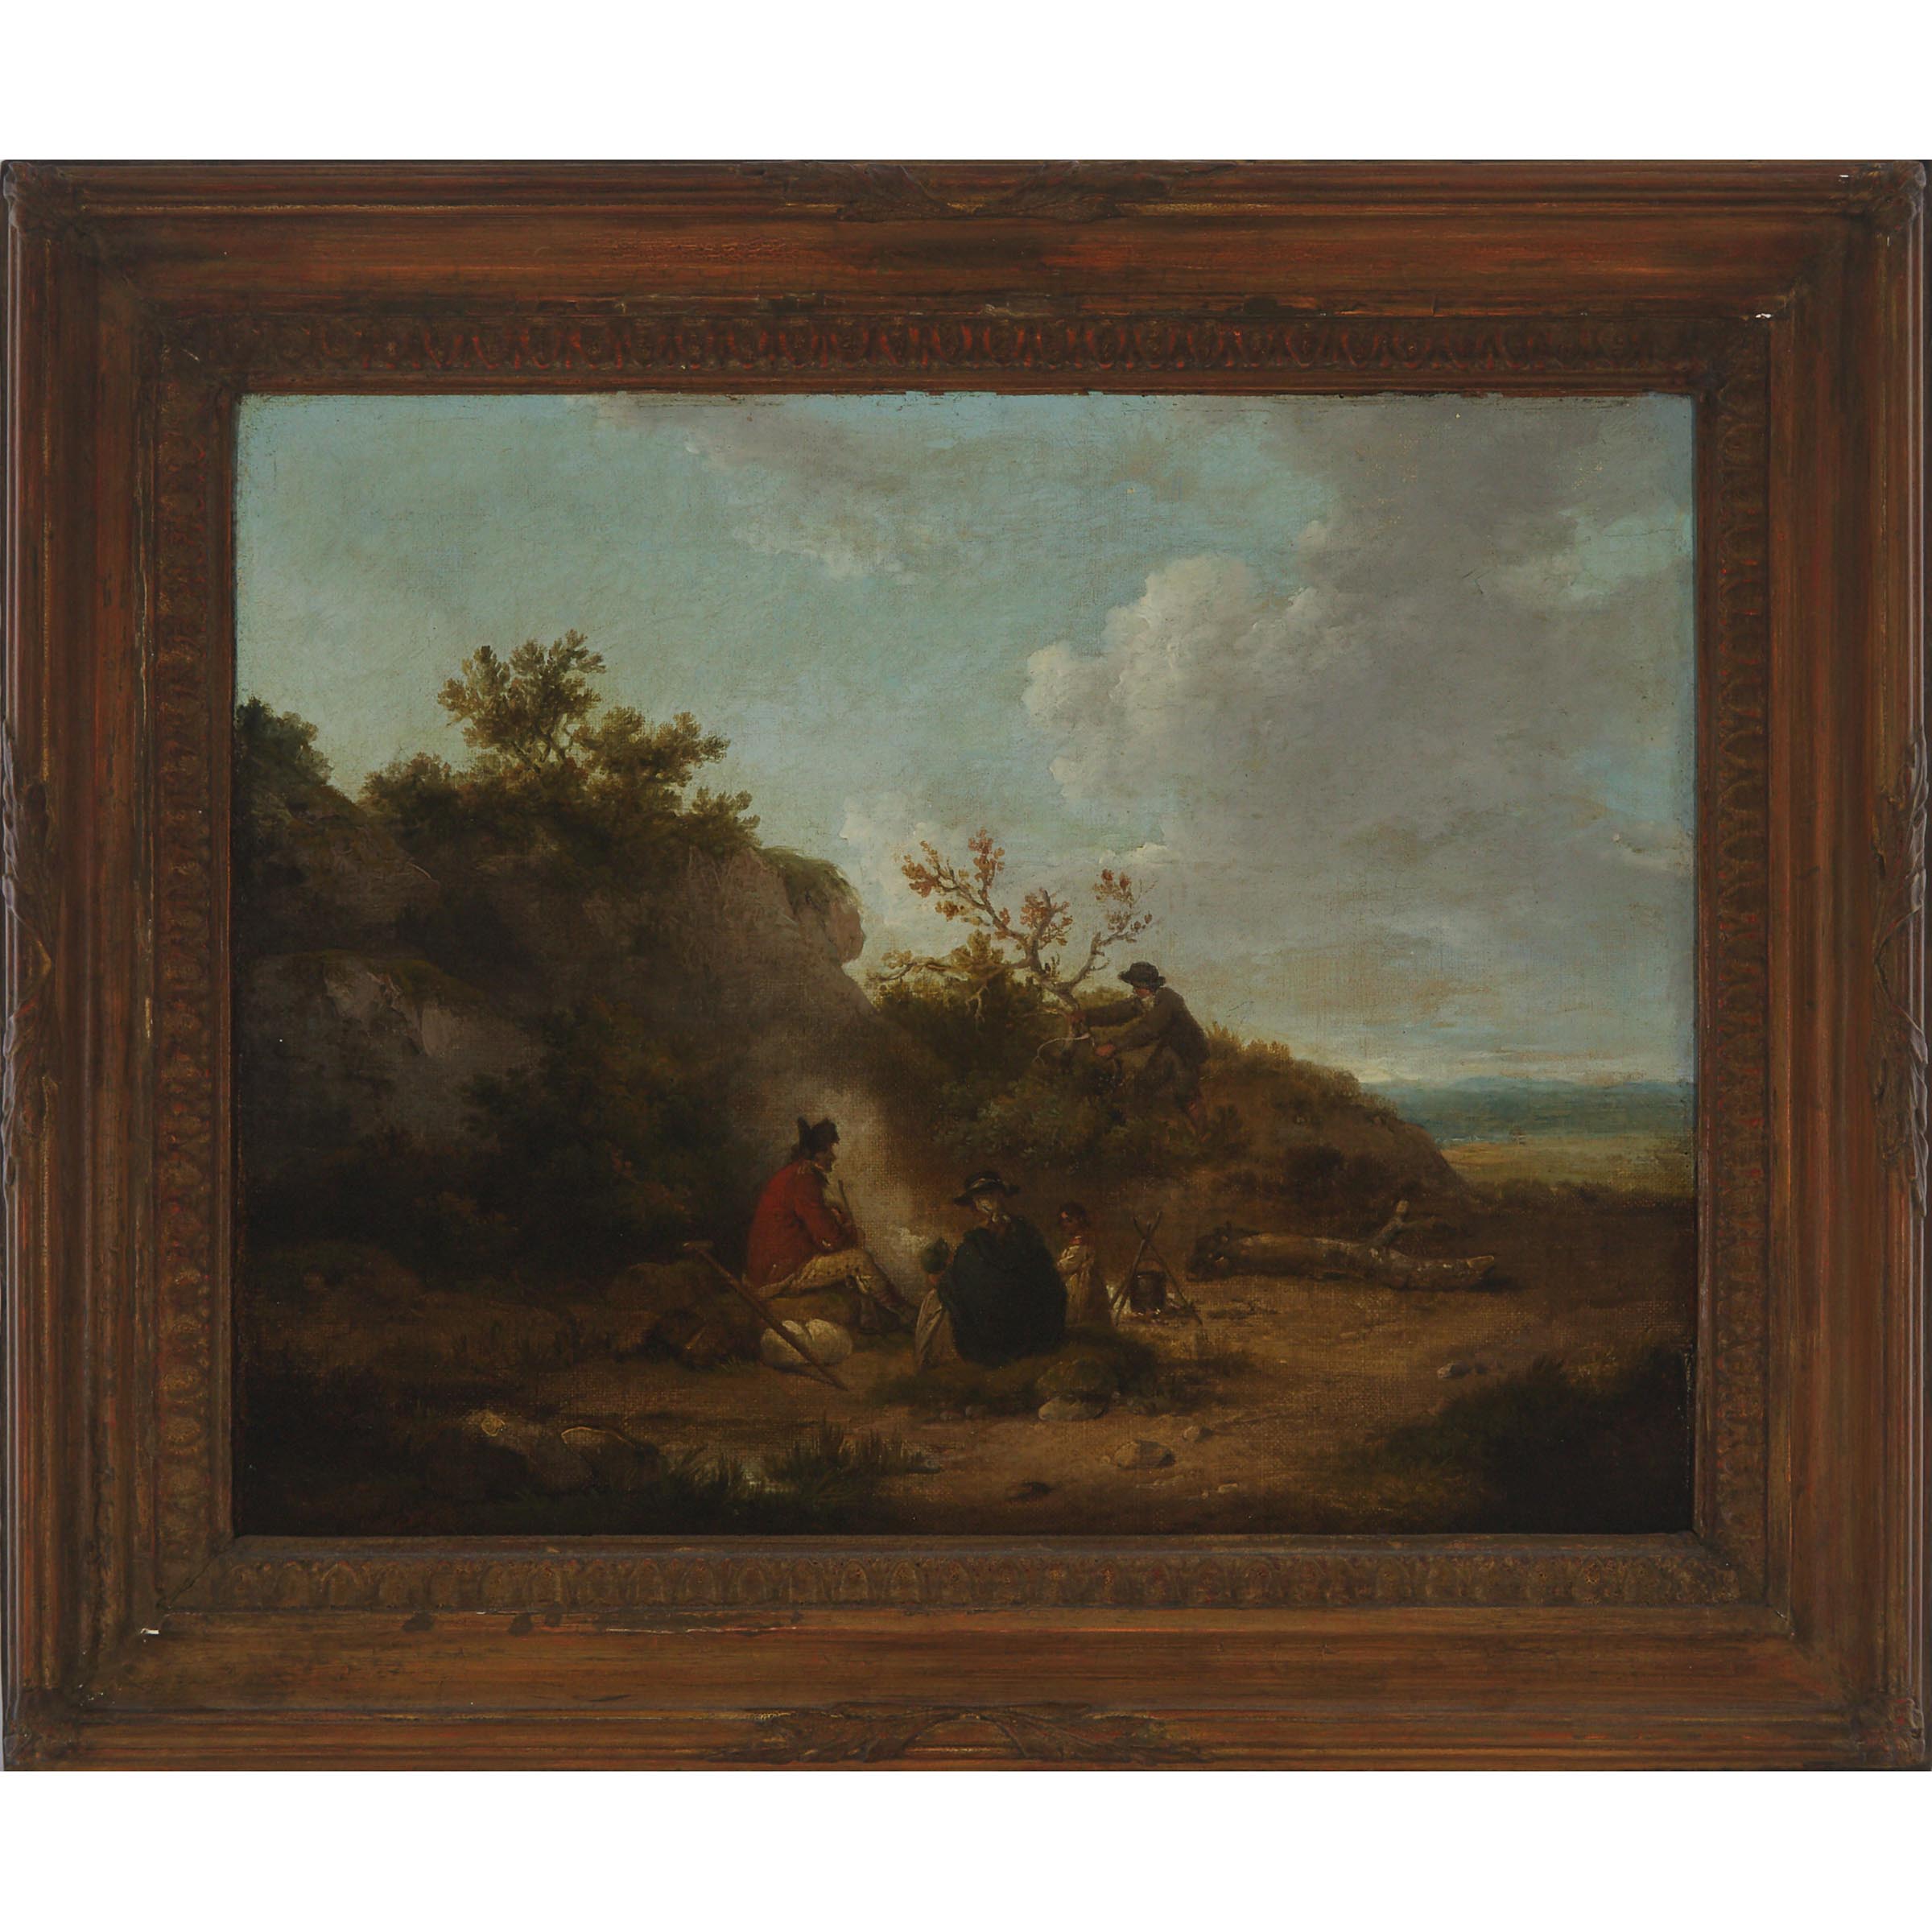 Attributed to George Morland (1763-1804)